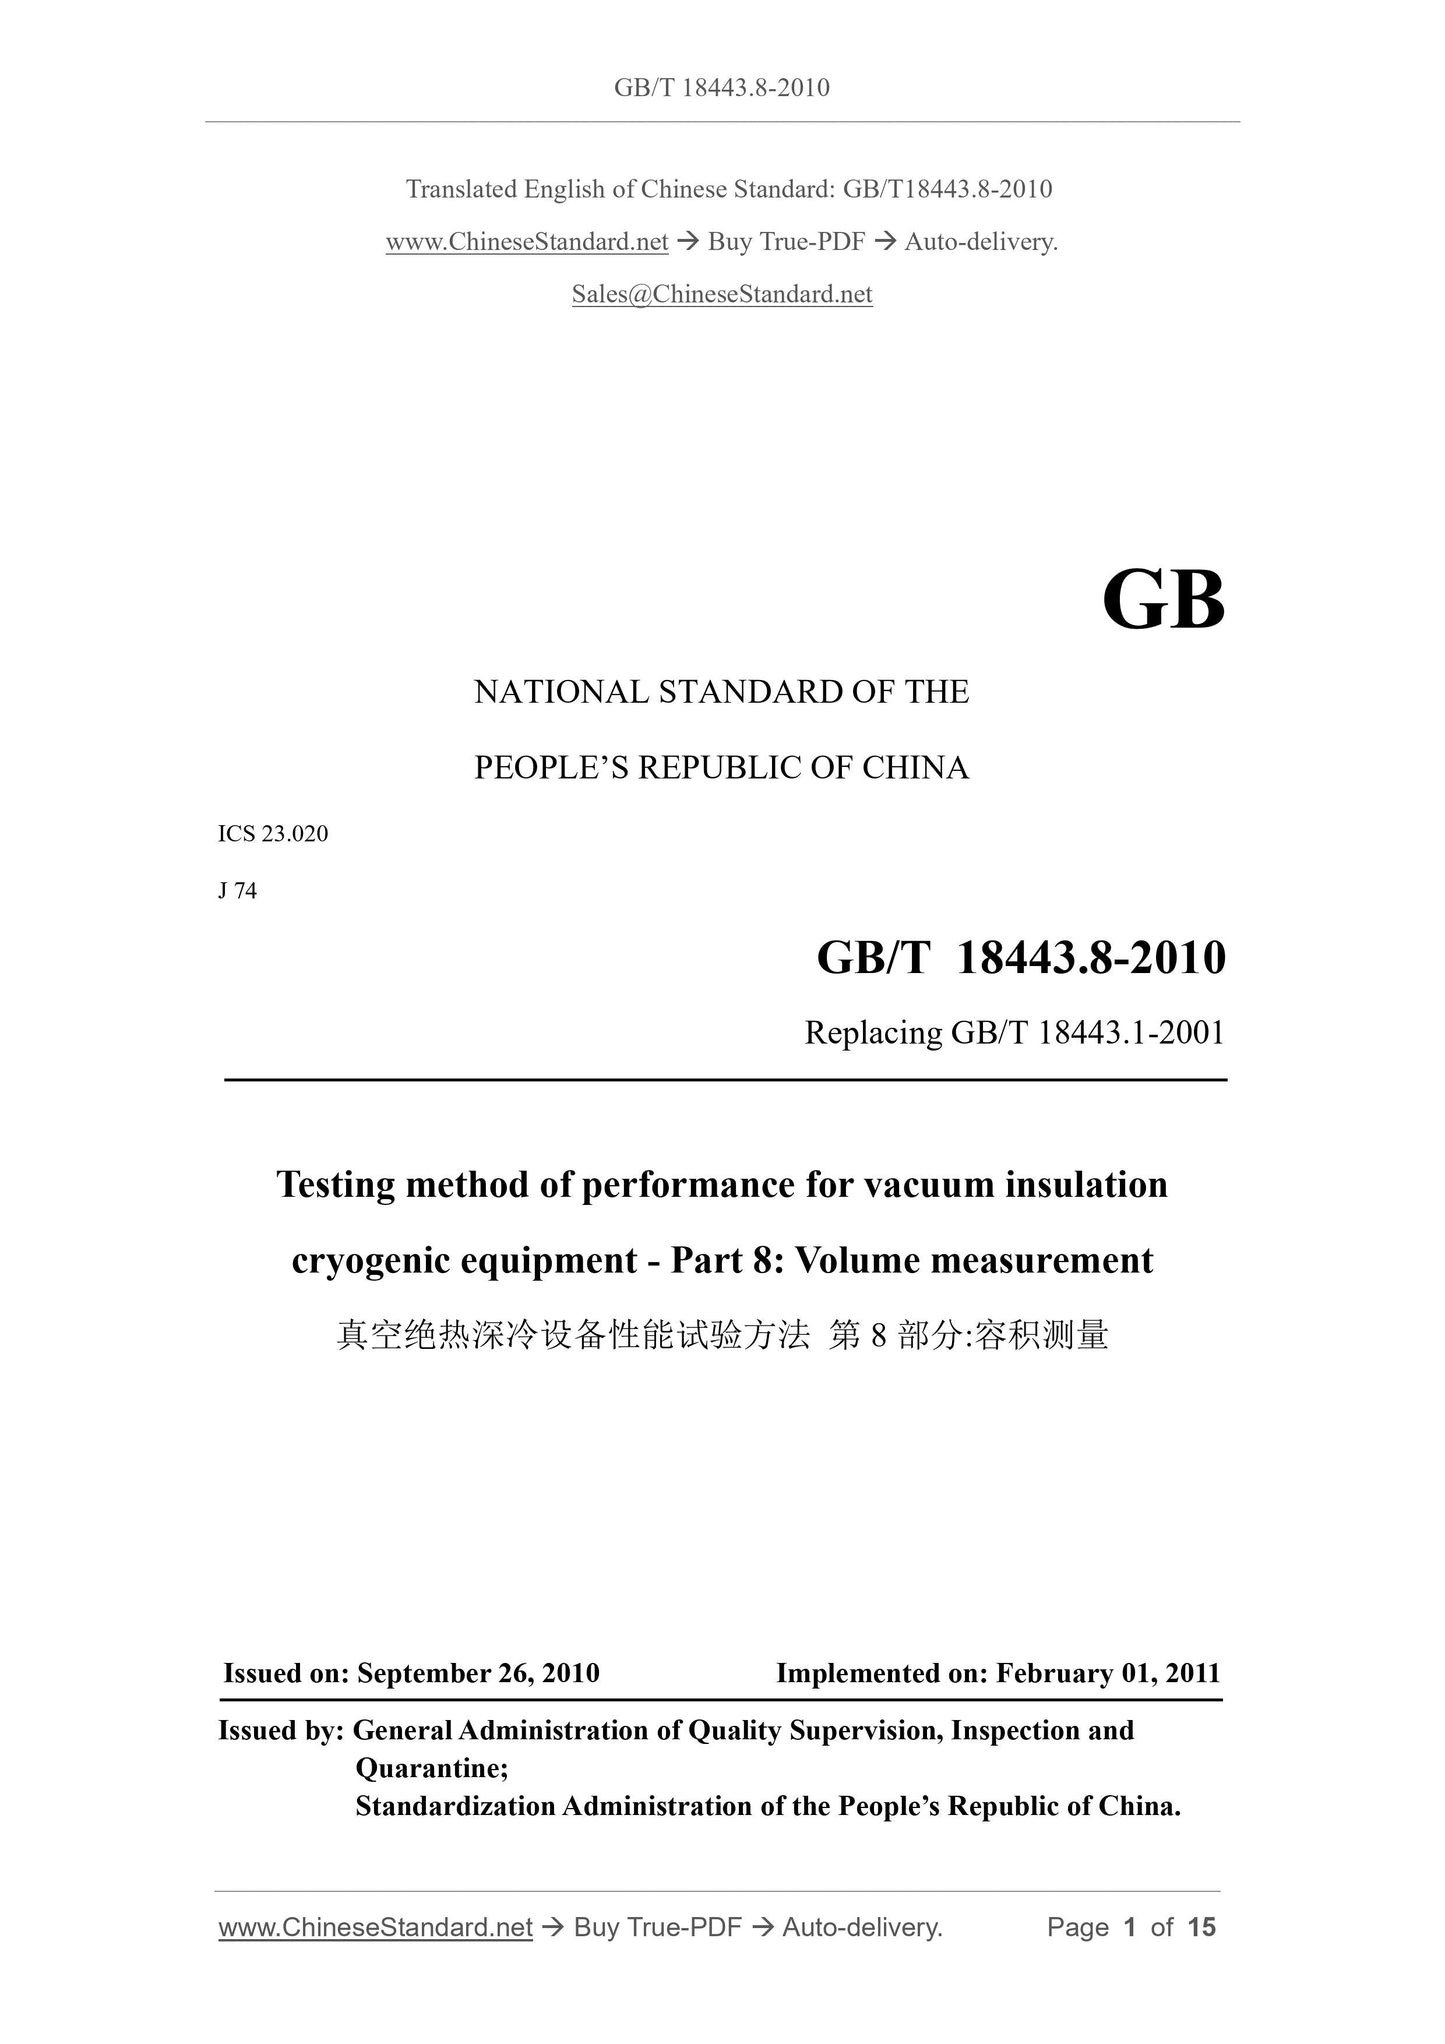 GB/T 18443.8-2010 Page 1